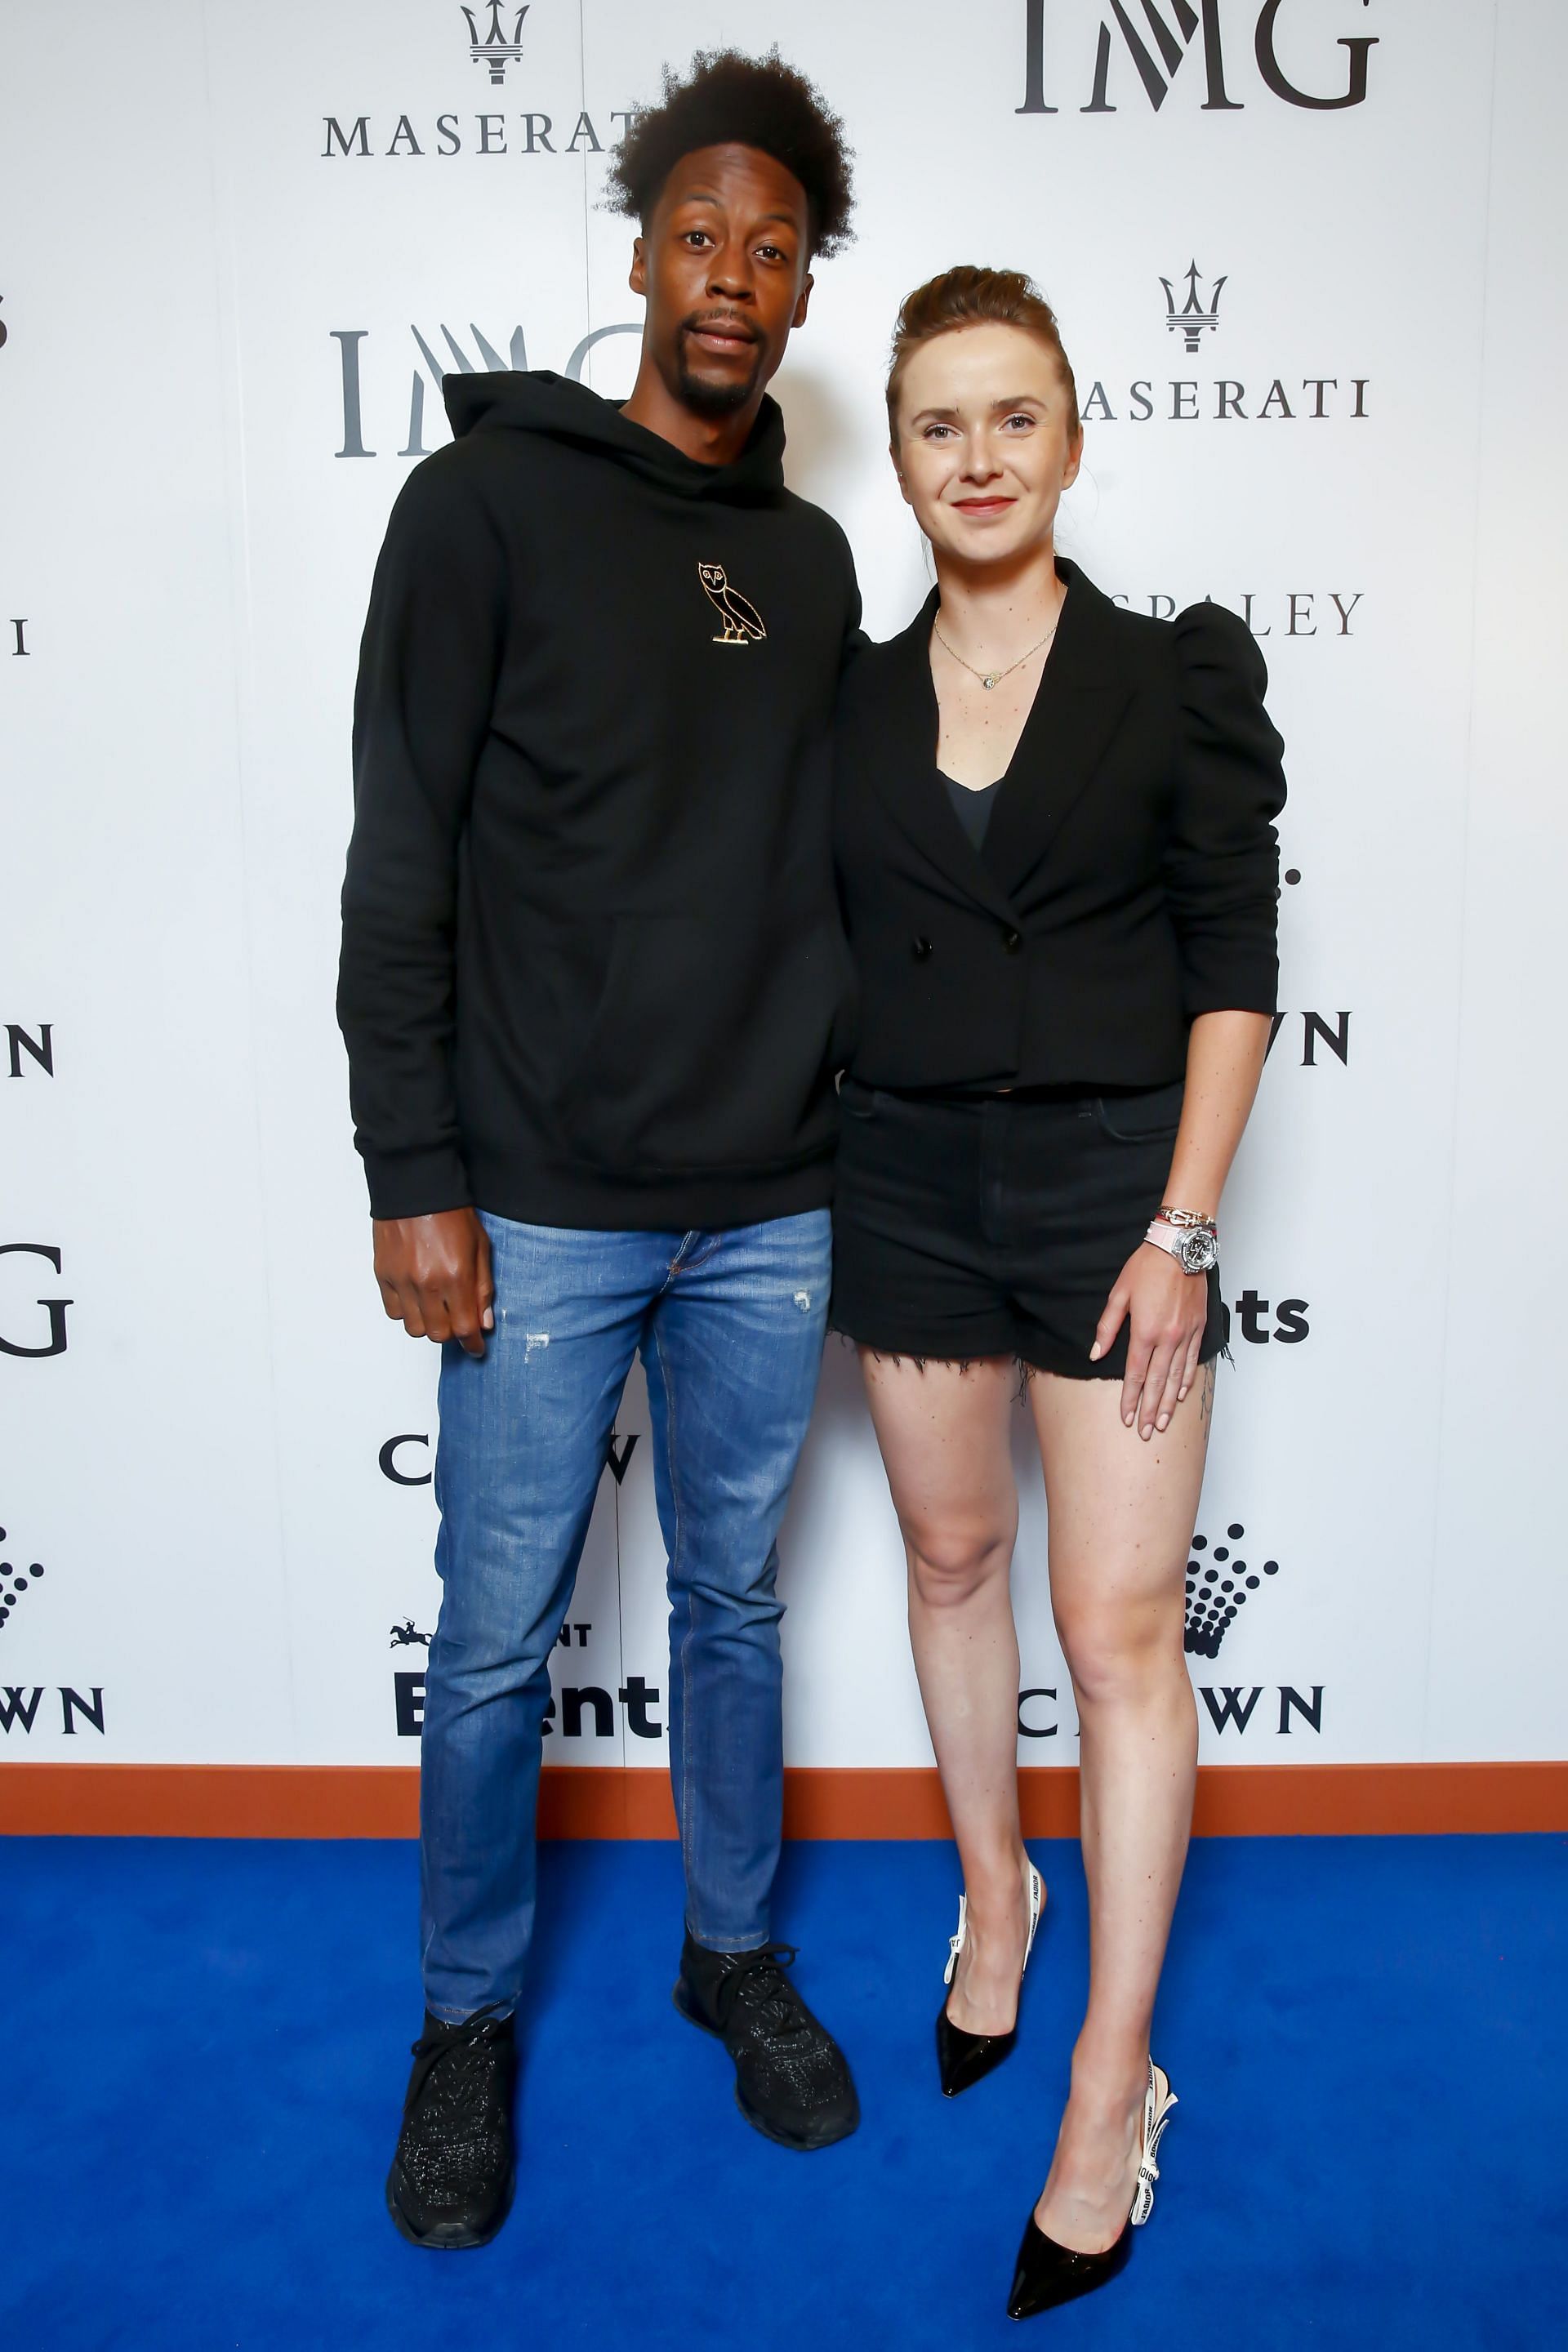 Gael Monfils and Elina Svitolina - Crown IMG Tennis Party